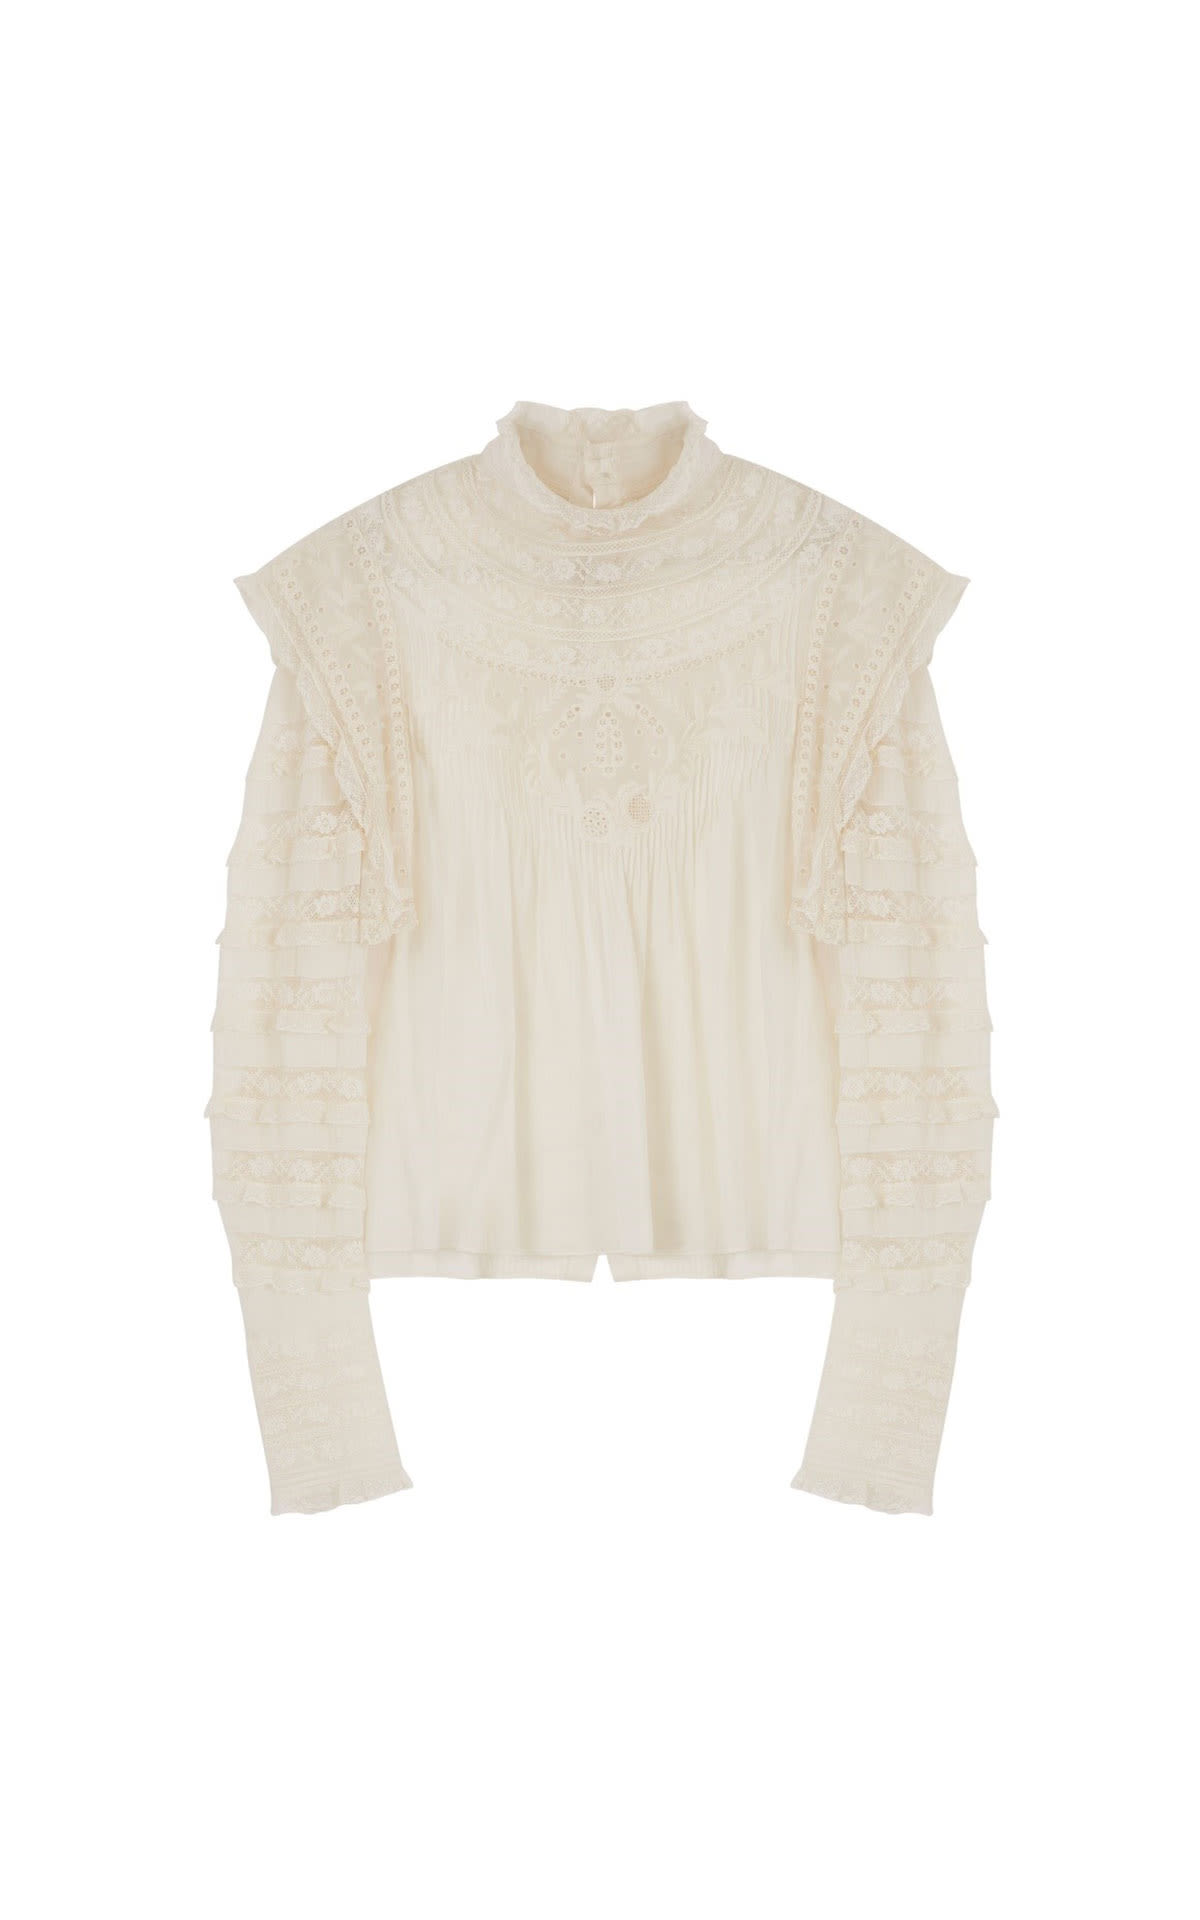 Isabel Marant Giulia blouse from Bicester Village